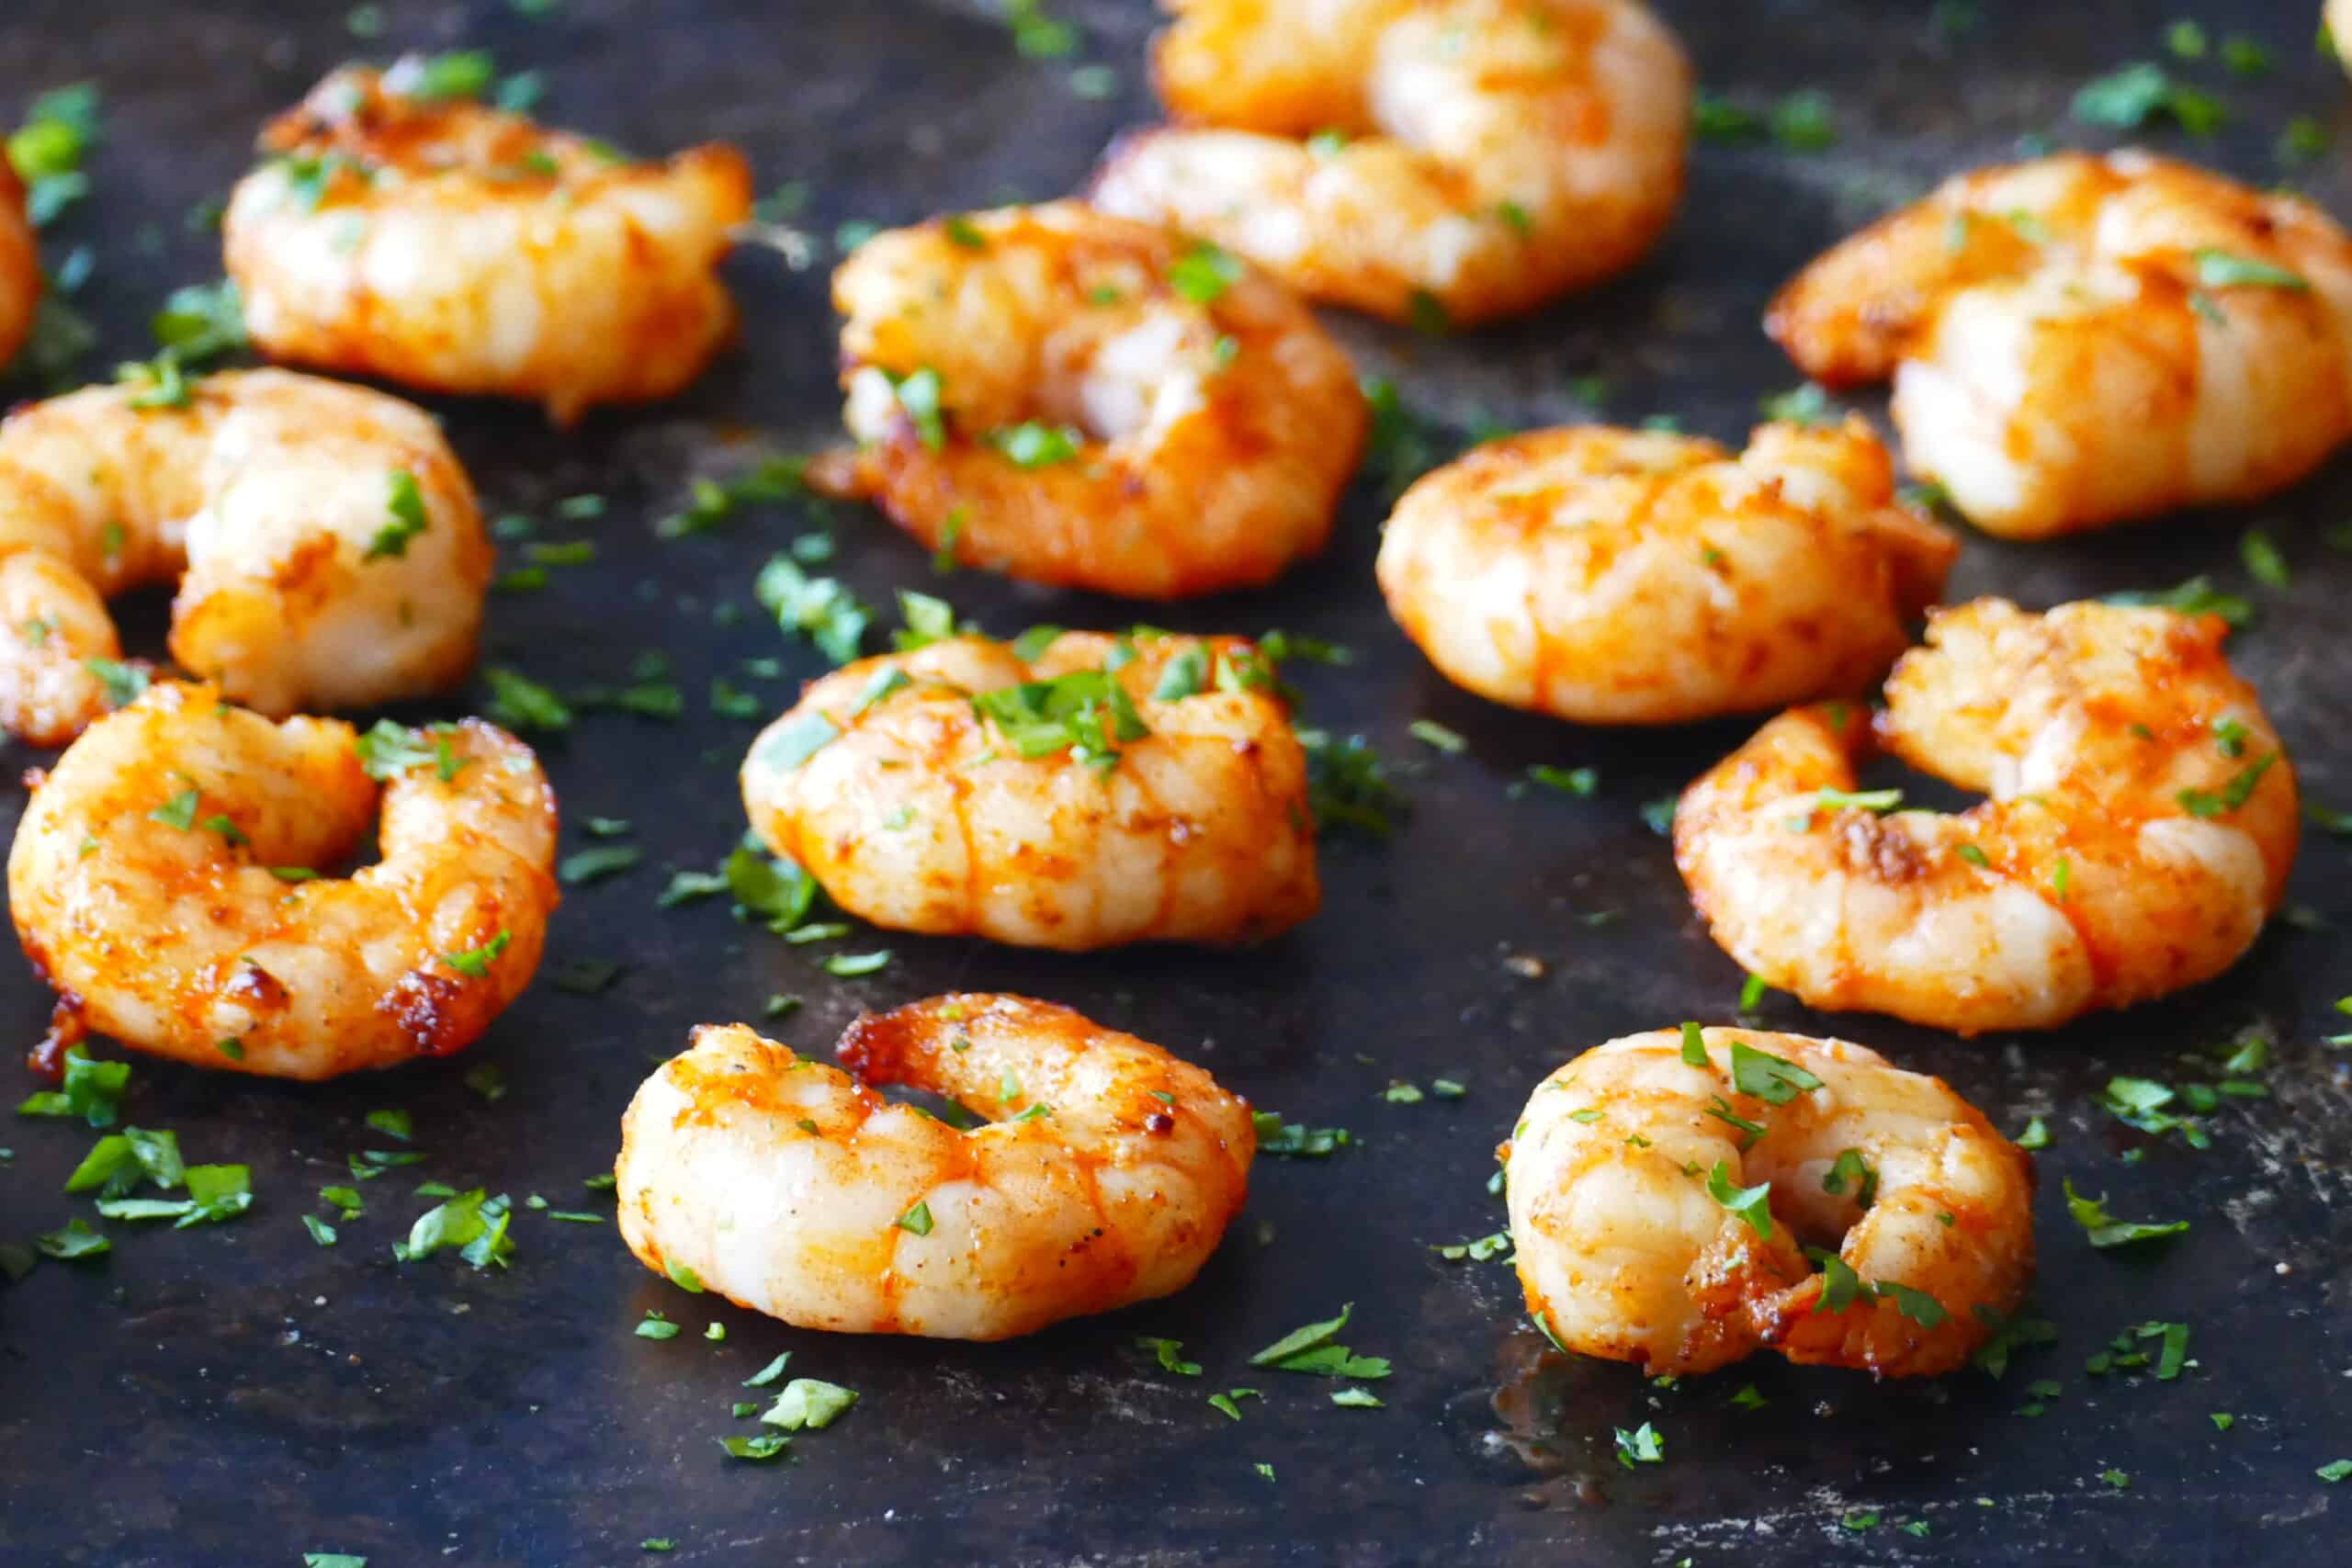 Cooked spiced shrimp arranged on a dark background with parsley garnish.